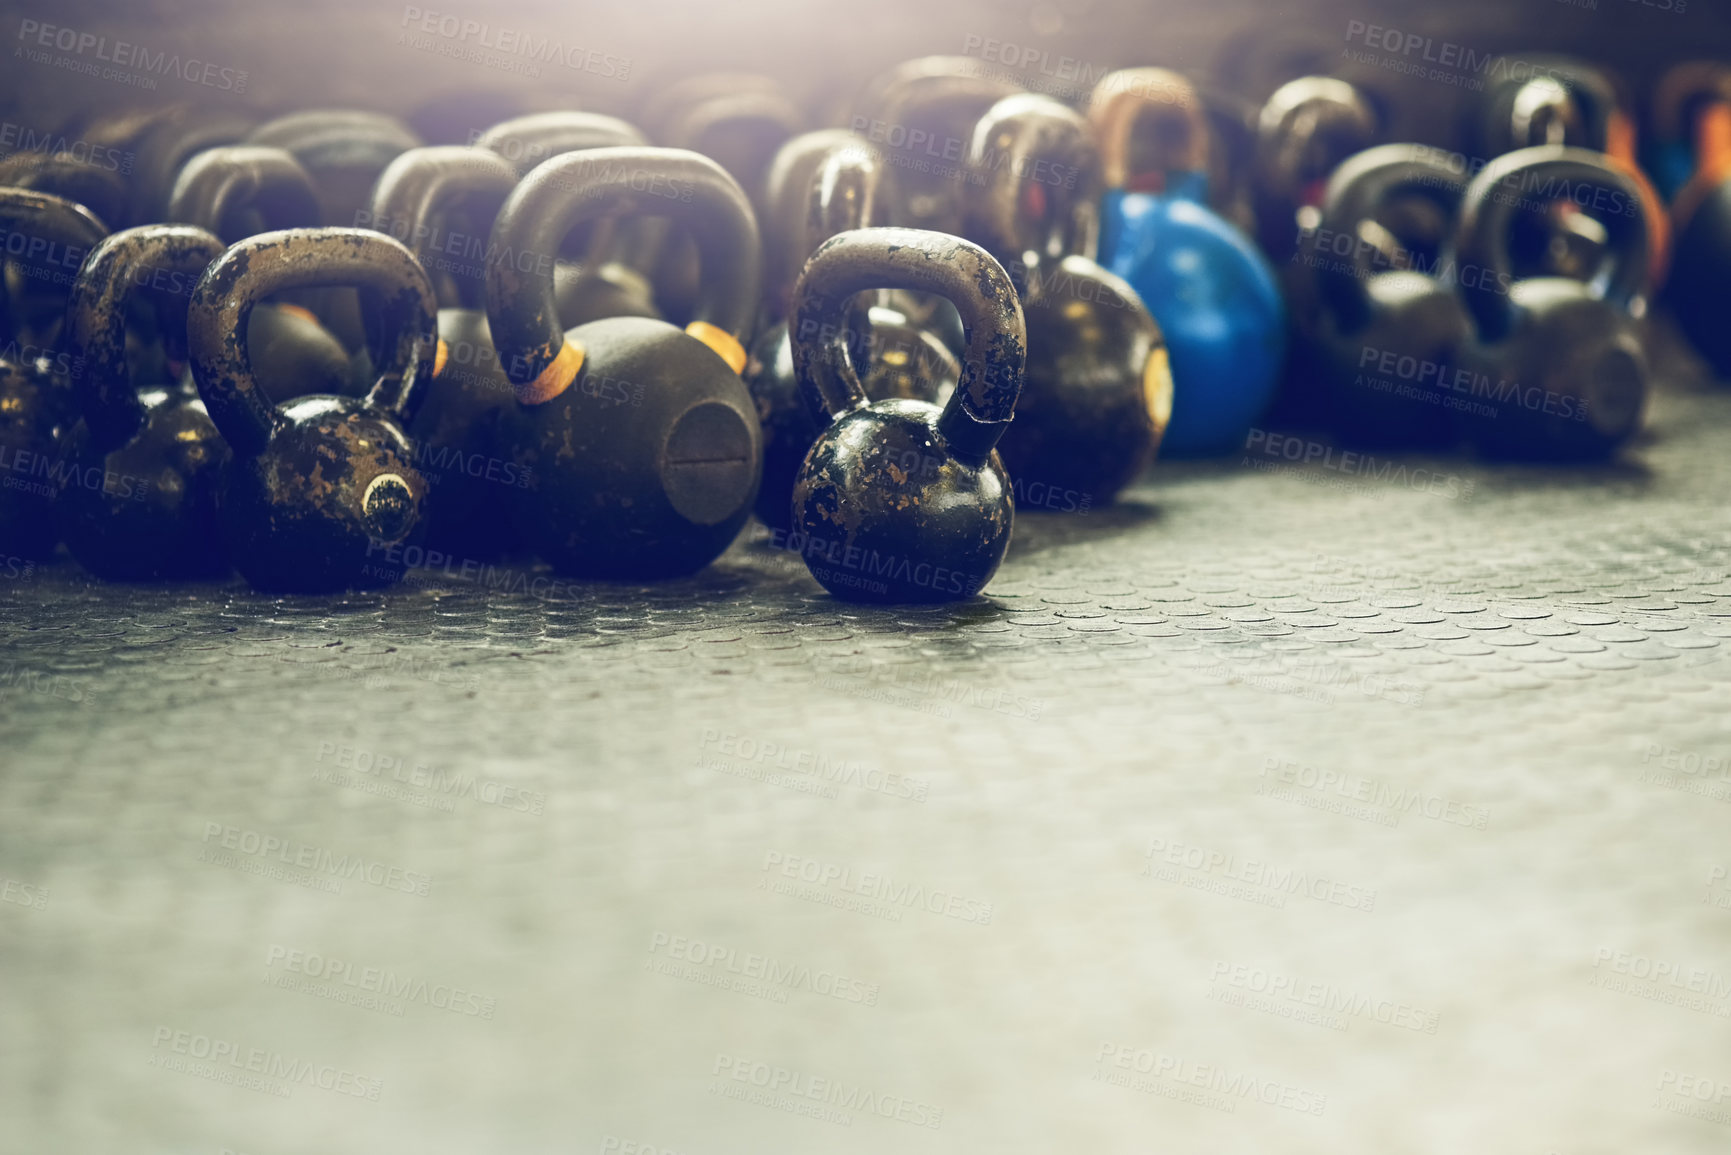 Buy stock photo Shot of weights in a gym